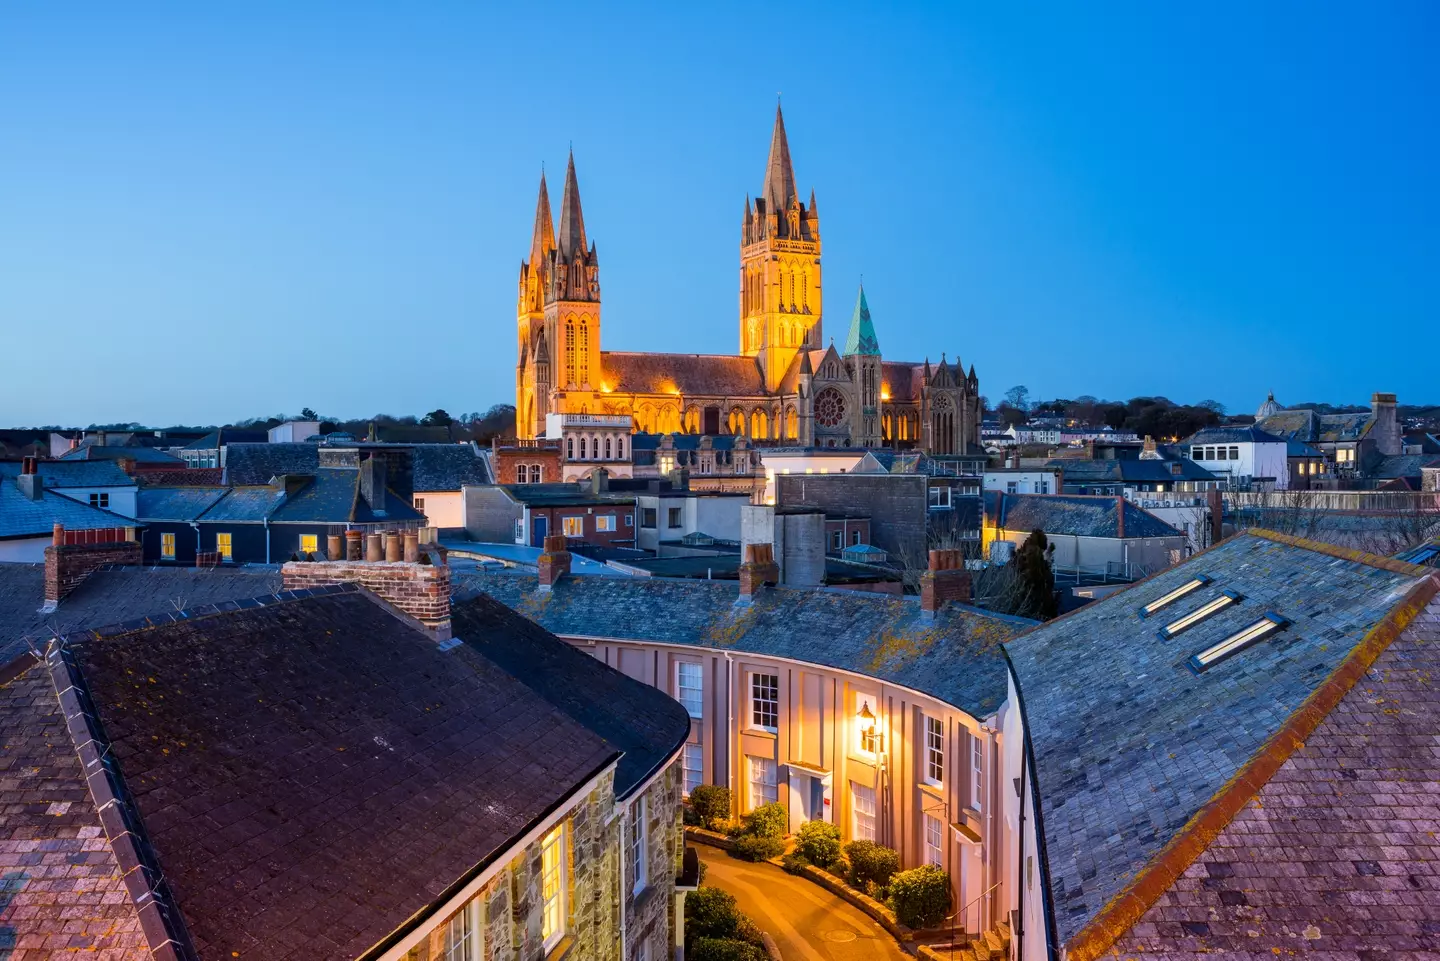 The little cathedral city of Truro ranked top of the list.